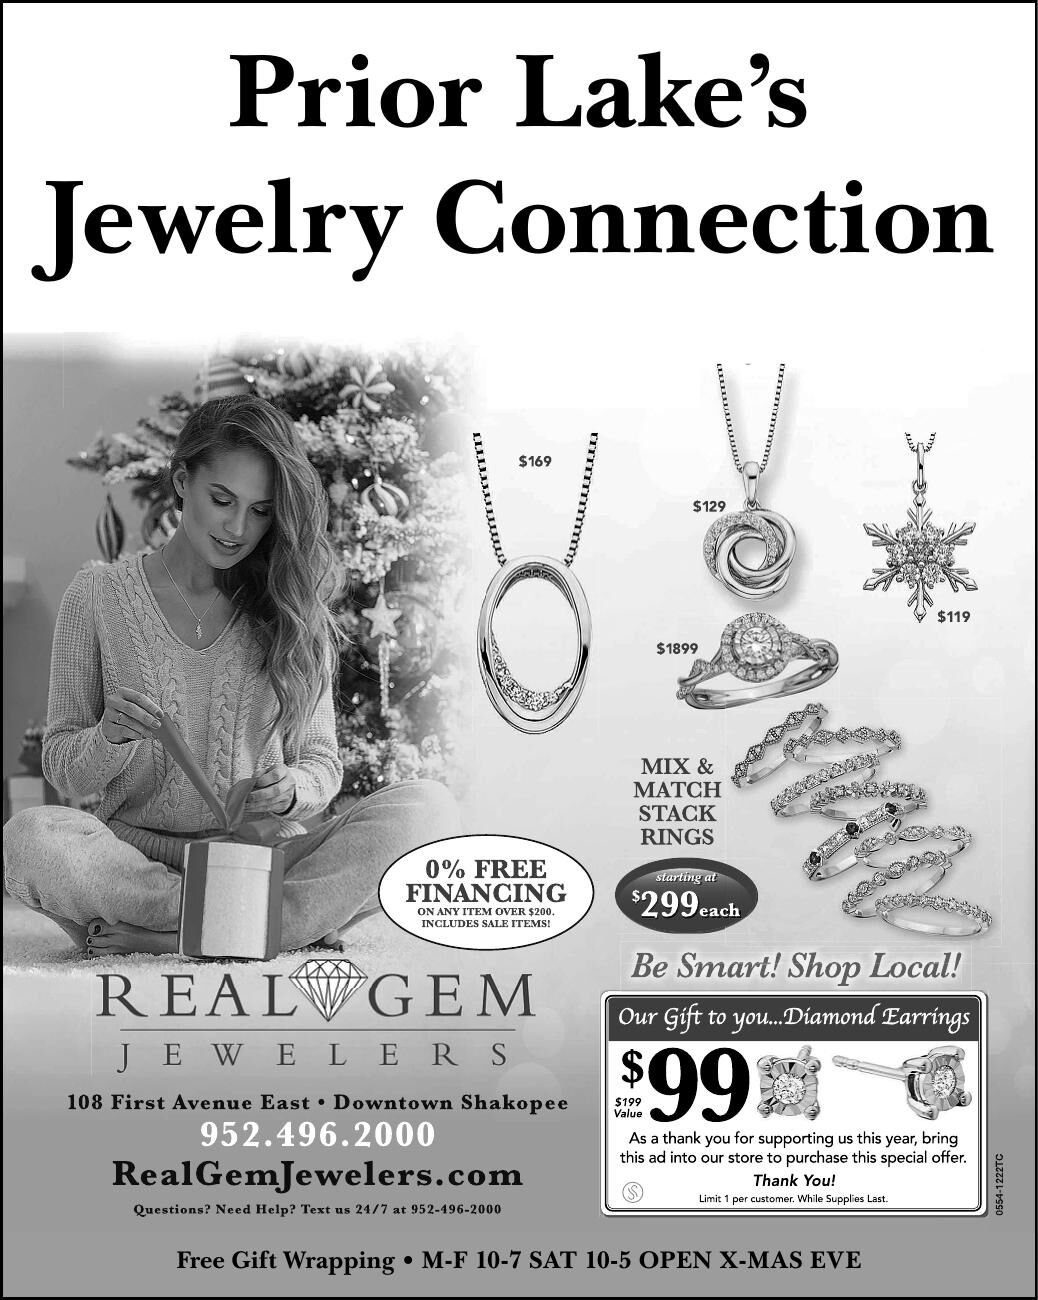 Prior Lake’s Jewelry Connection Free